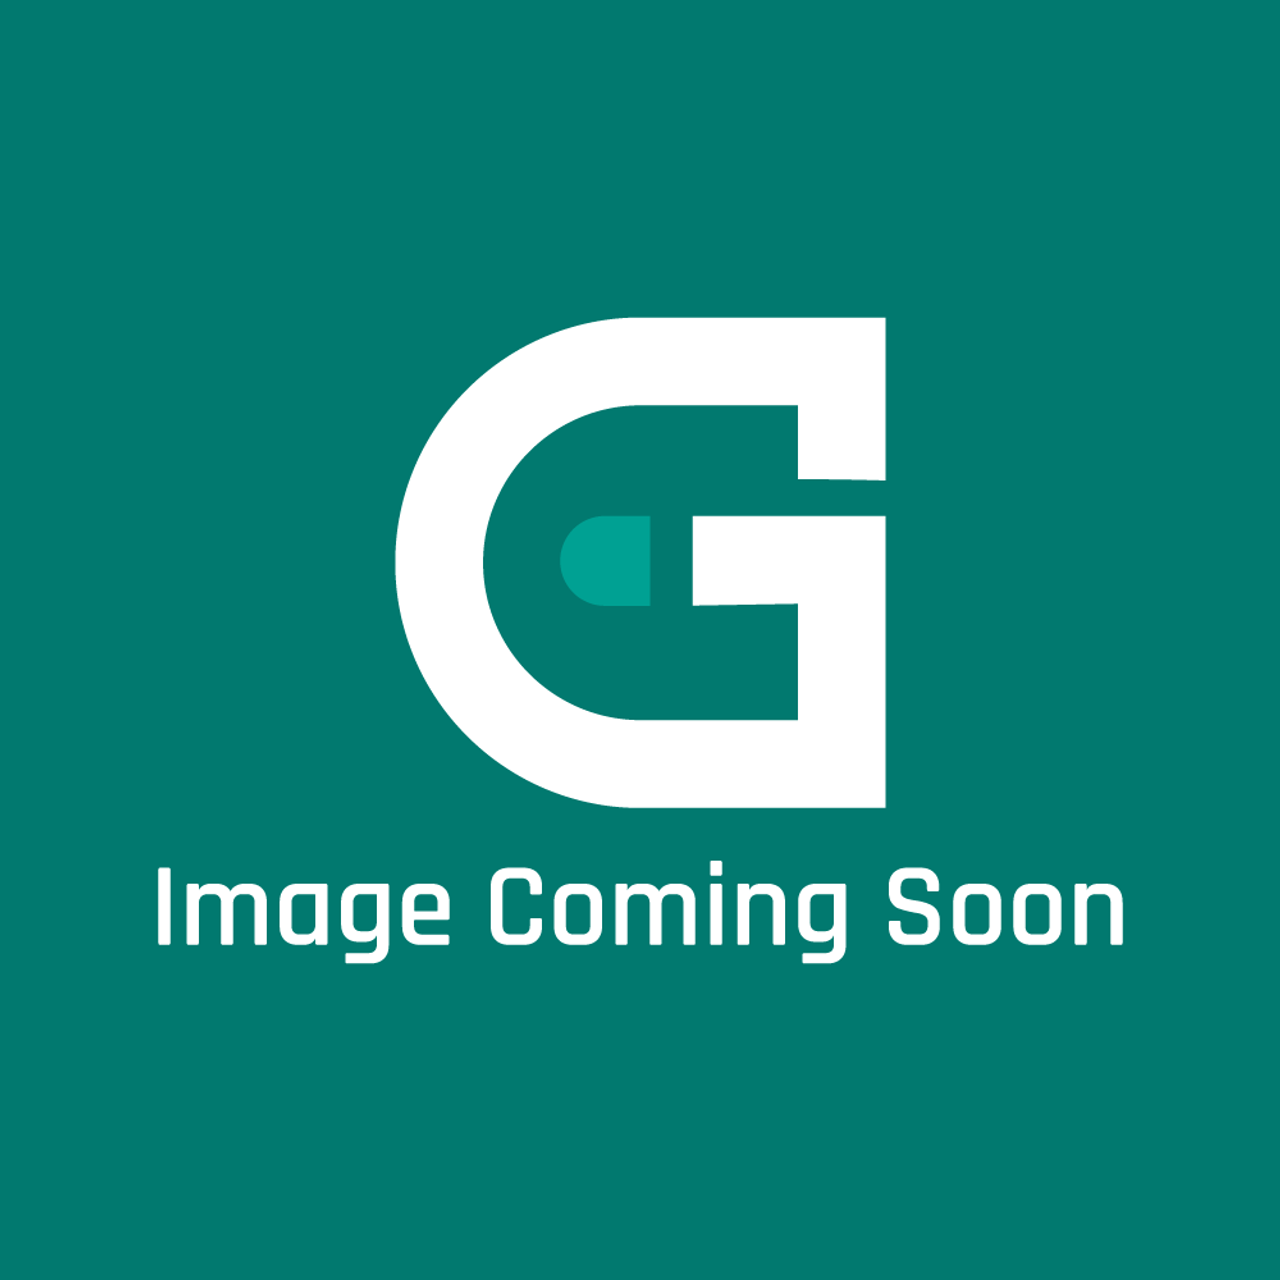 AGA Marvel 90-54003-83 - H&T Main Hf Vyv 24 - 6-Month Lead Time - Image Coming Soon!